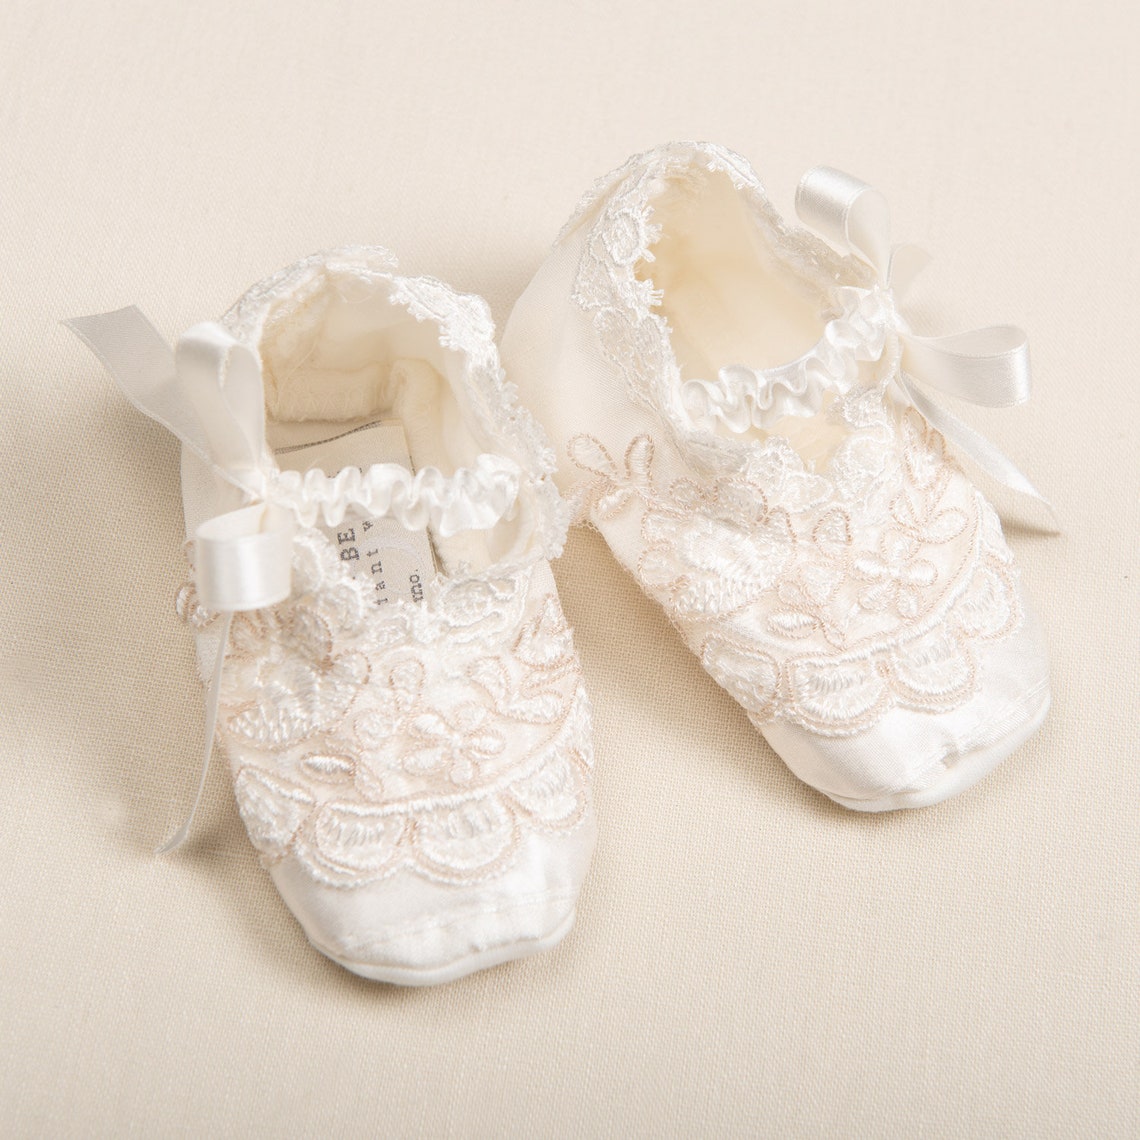 Baby Girl Ivory Silk Christening Shoes Baby Girl Lace Shoes | Etsy